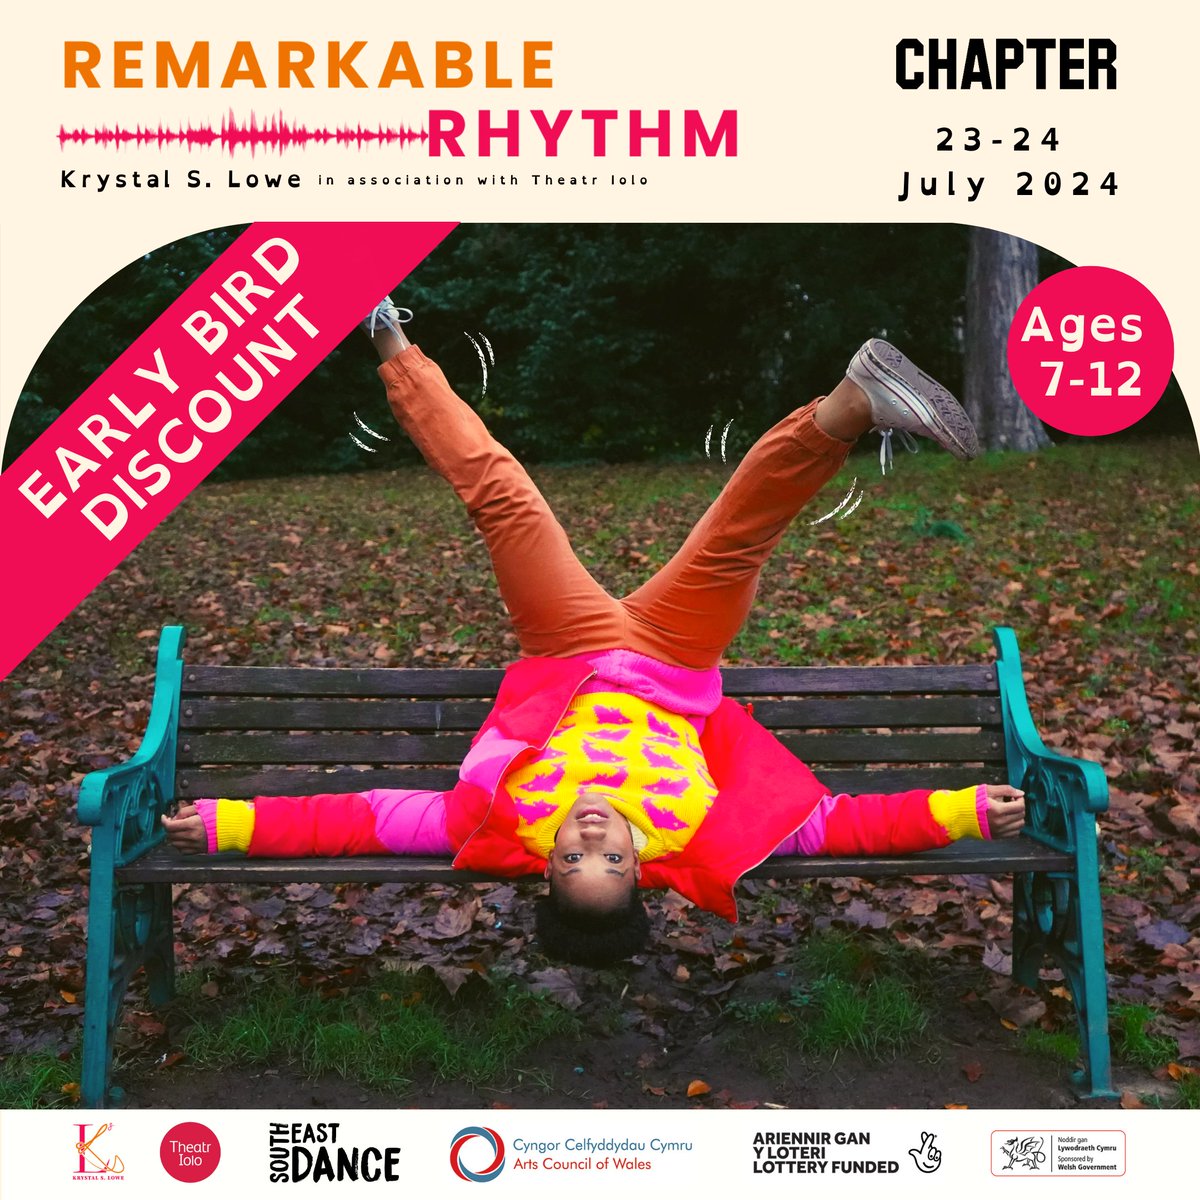 Remarkable Rhythm is a 2-person dance theatre show for families that will not only wow you but may make you want to dance! 'Energy and enthusiasm wrapped around an amazing story!' - Audience Member 23 & 24 Jul Book now for Early Bird discount! buff.ly/3UmpbPz